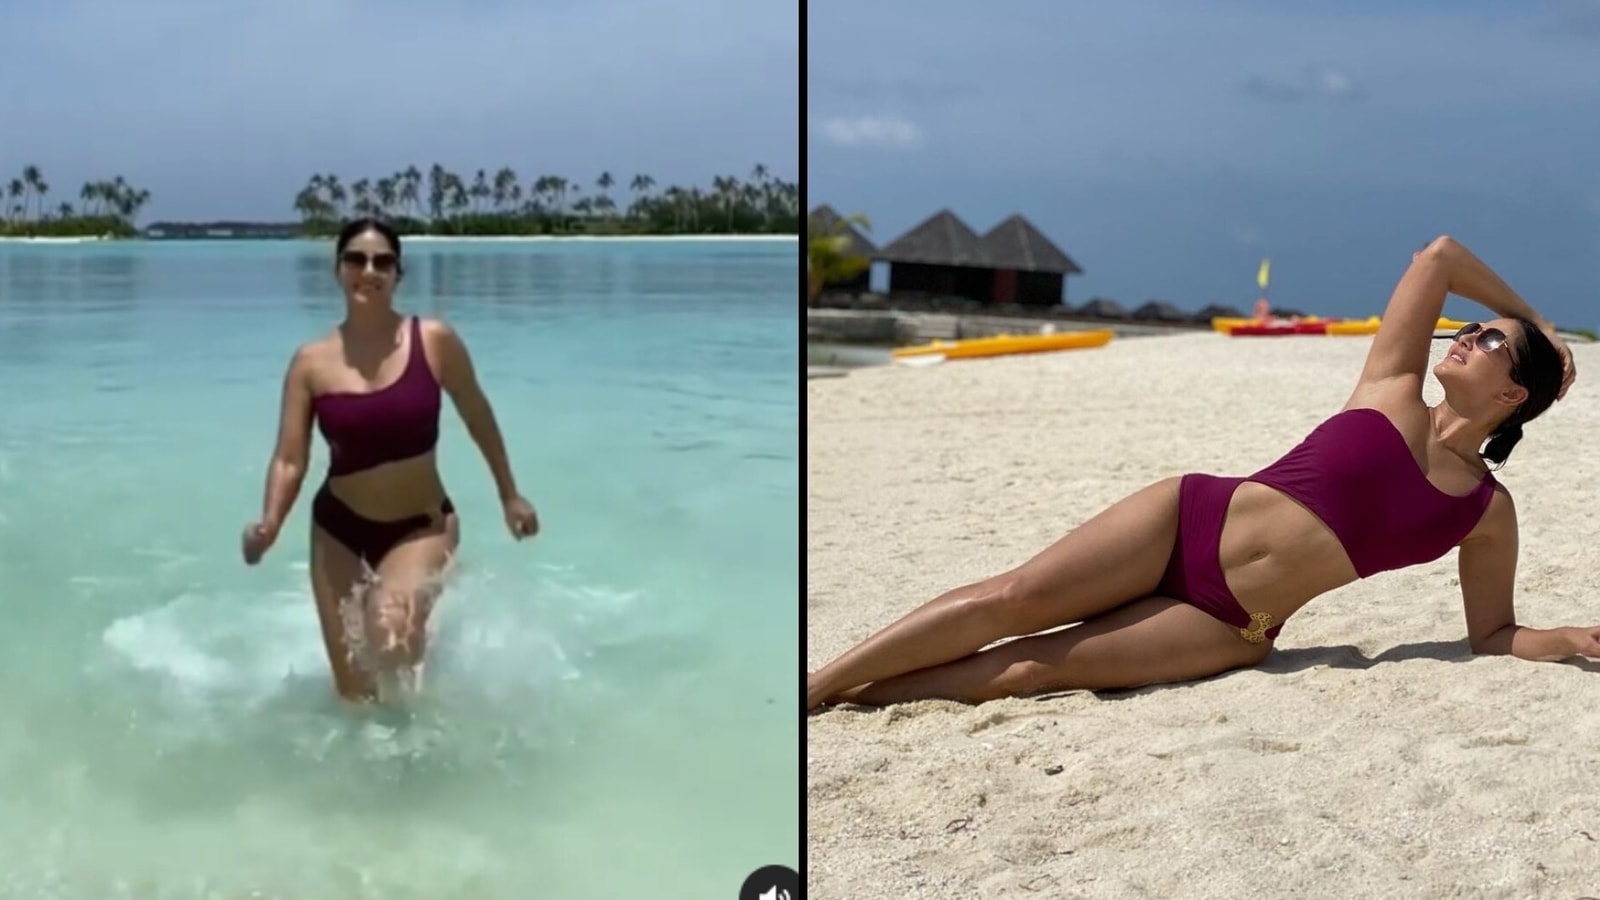 Sanee Lavan Xxx Videos - Sunny Leone does slo-mo run as she emerges from water, blows kiss. Watch  video from Maldives holiday | Bollywood - Hindustan Times